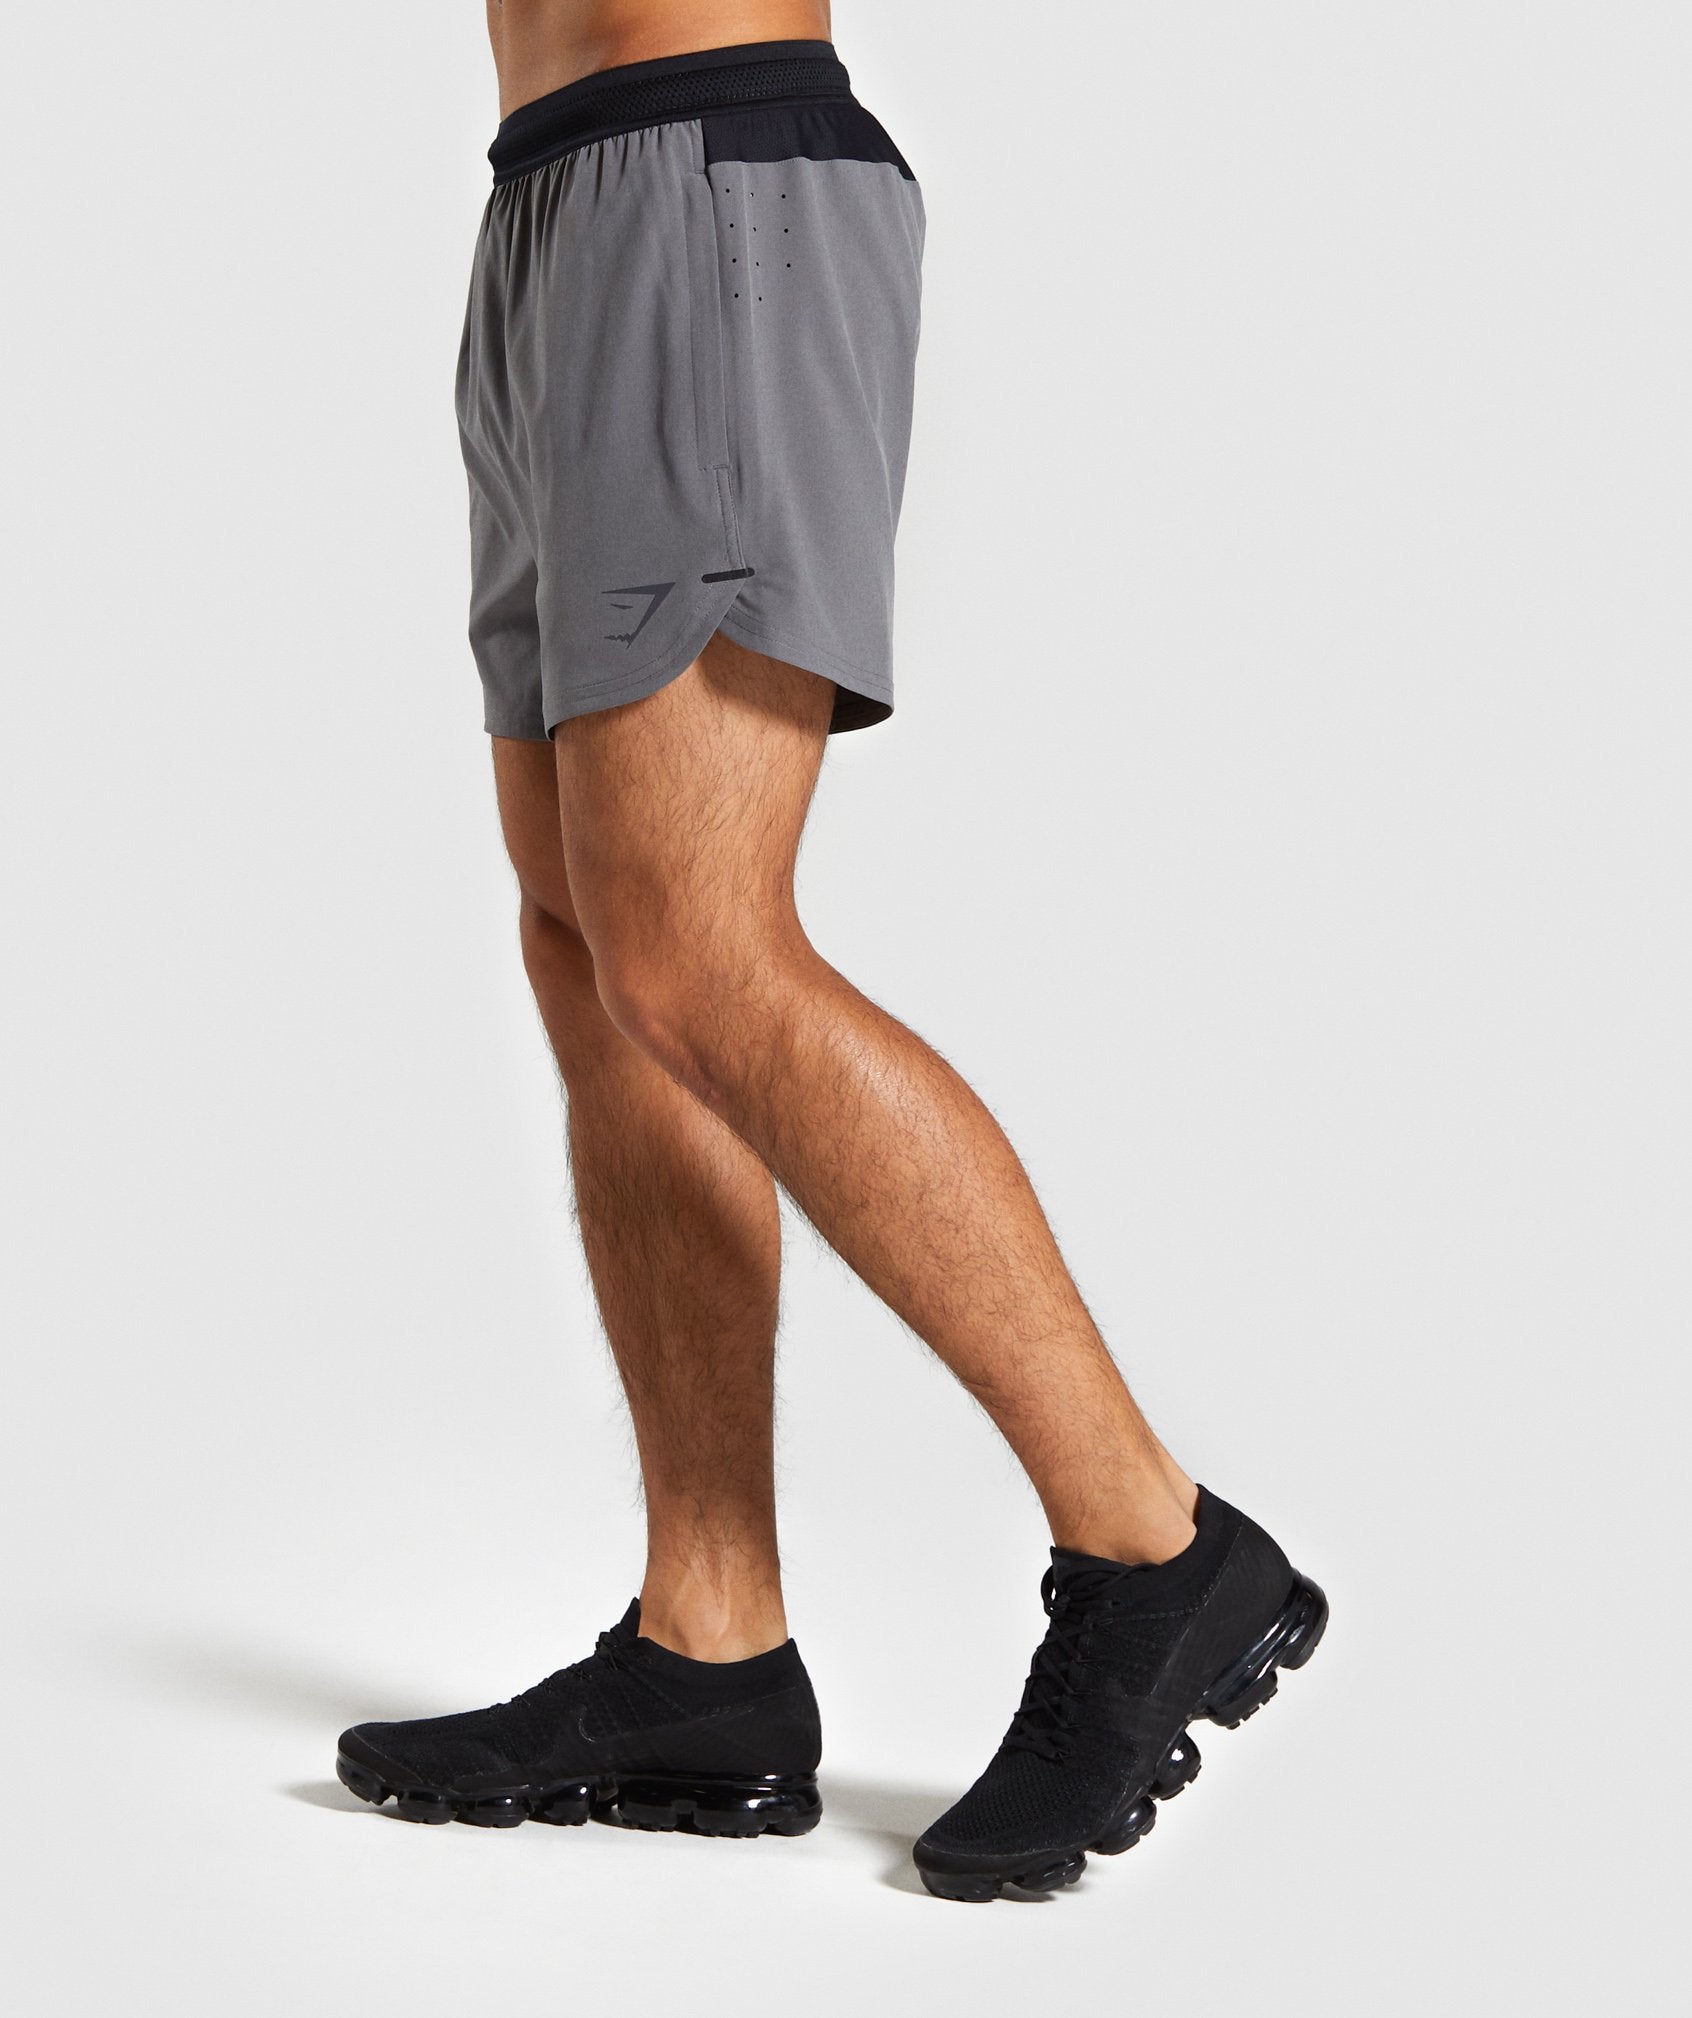 Speed Shorts in Grey - view 3